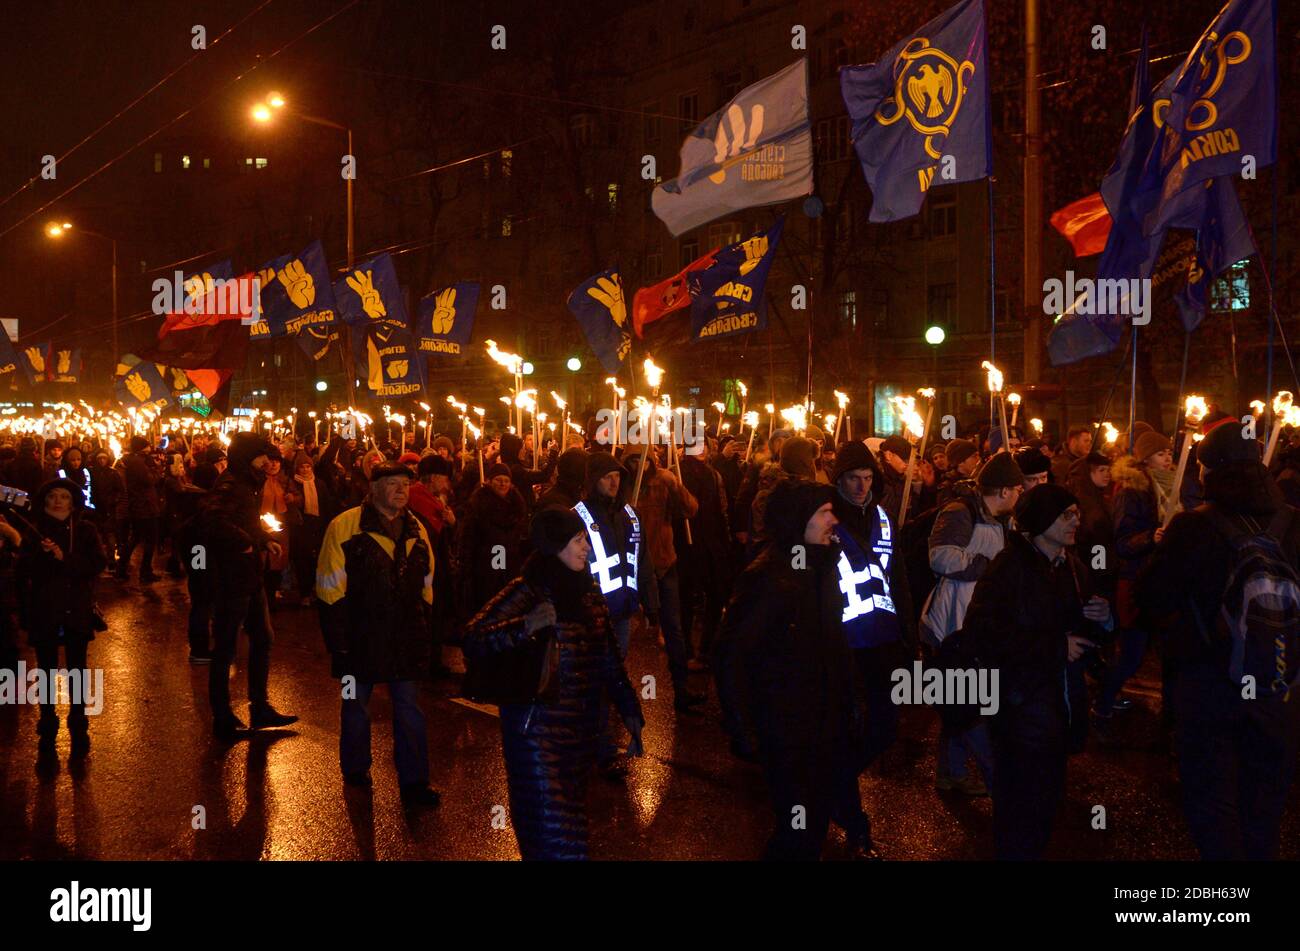 Ukrainian far-rightists marching on the night street in the torchlight procession to celebrate the birthday of nationalists leader Stepan Bandera Stock Photo